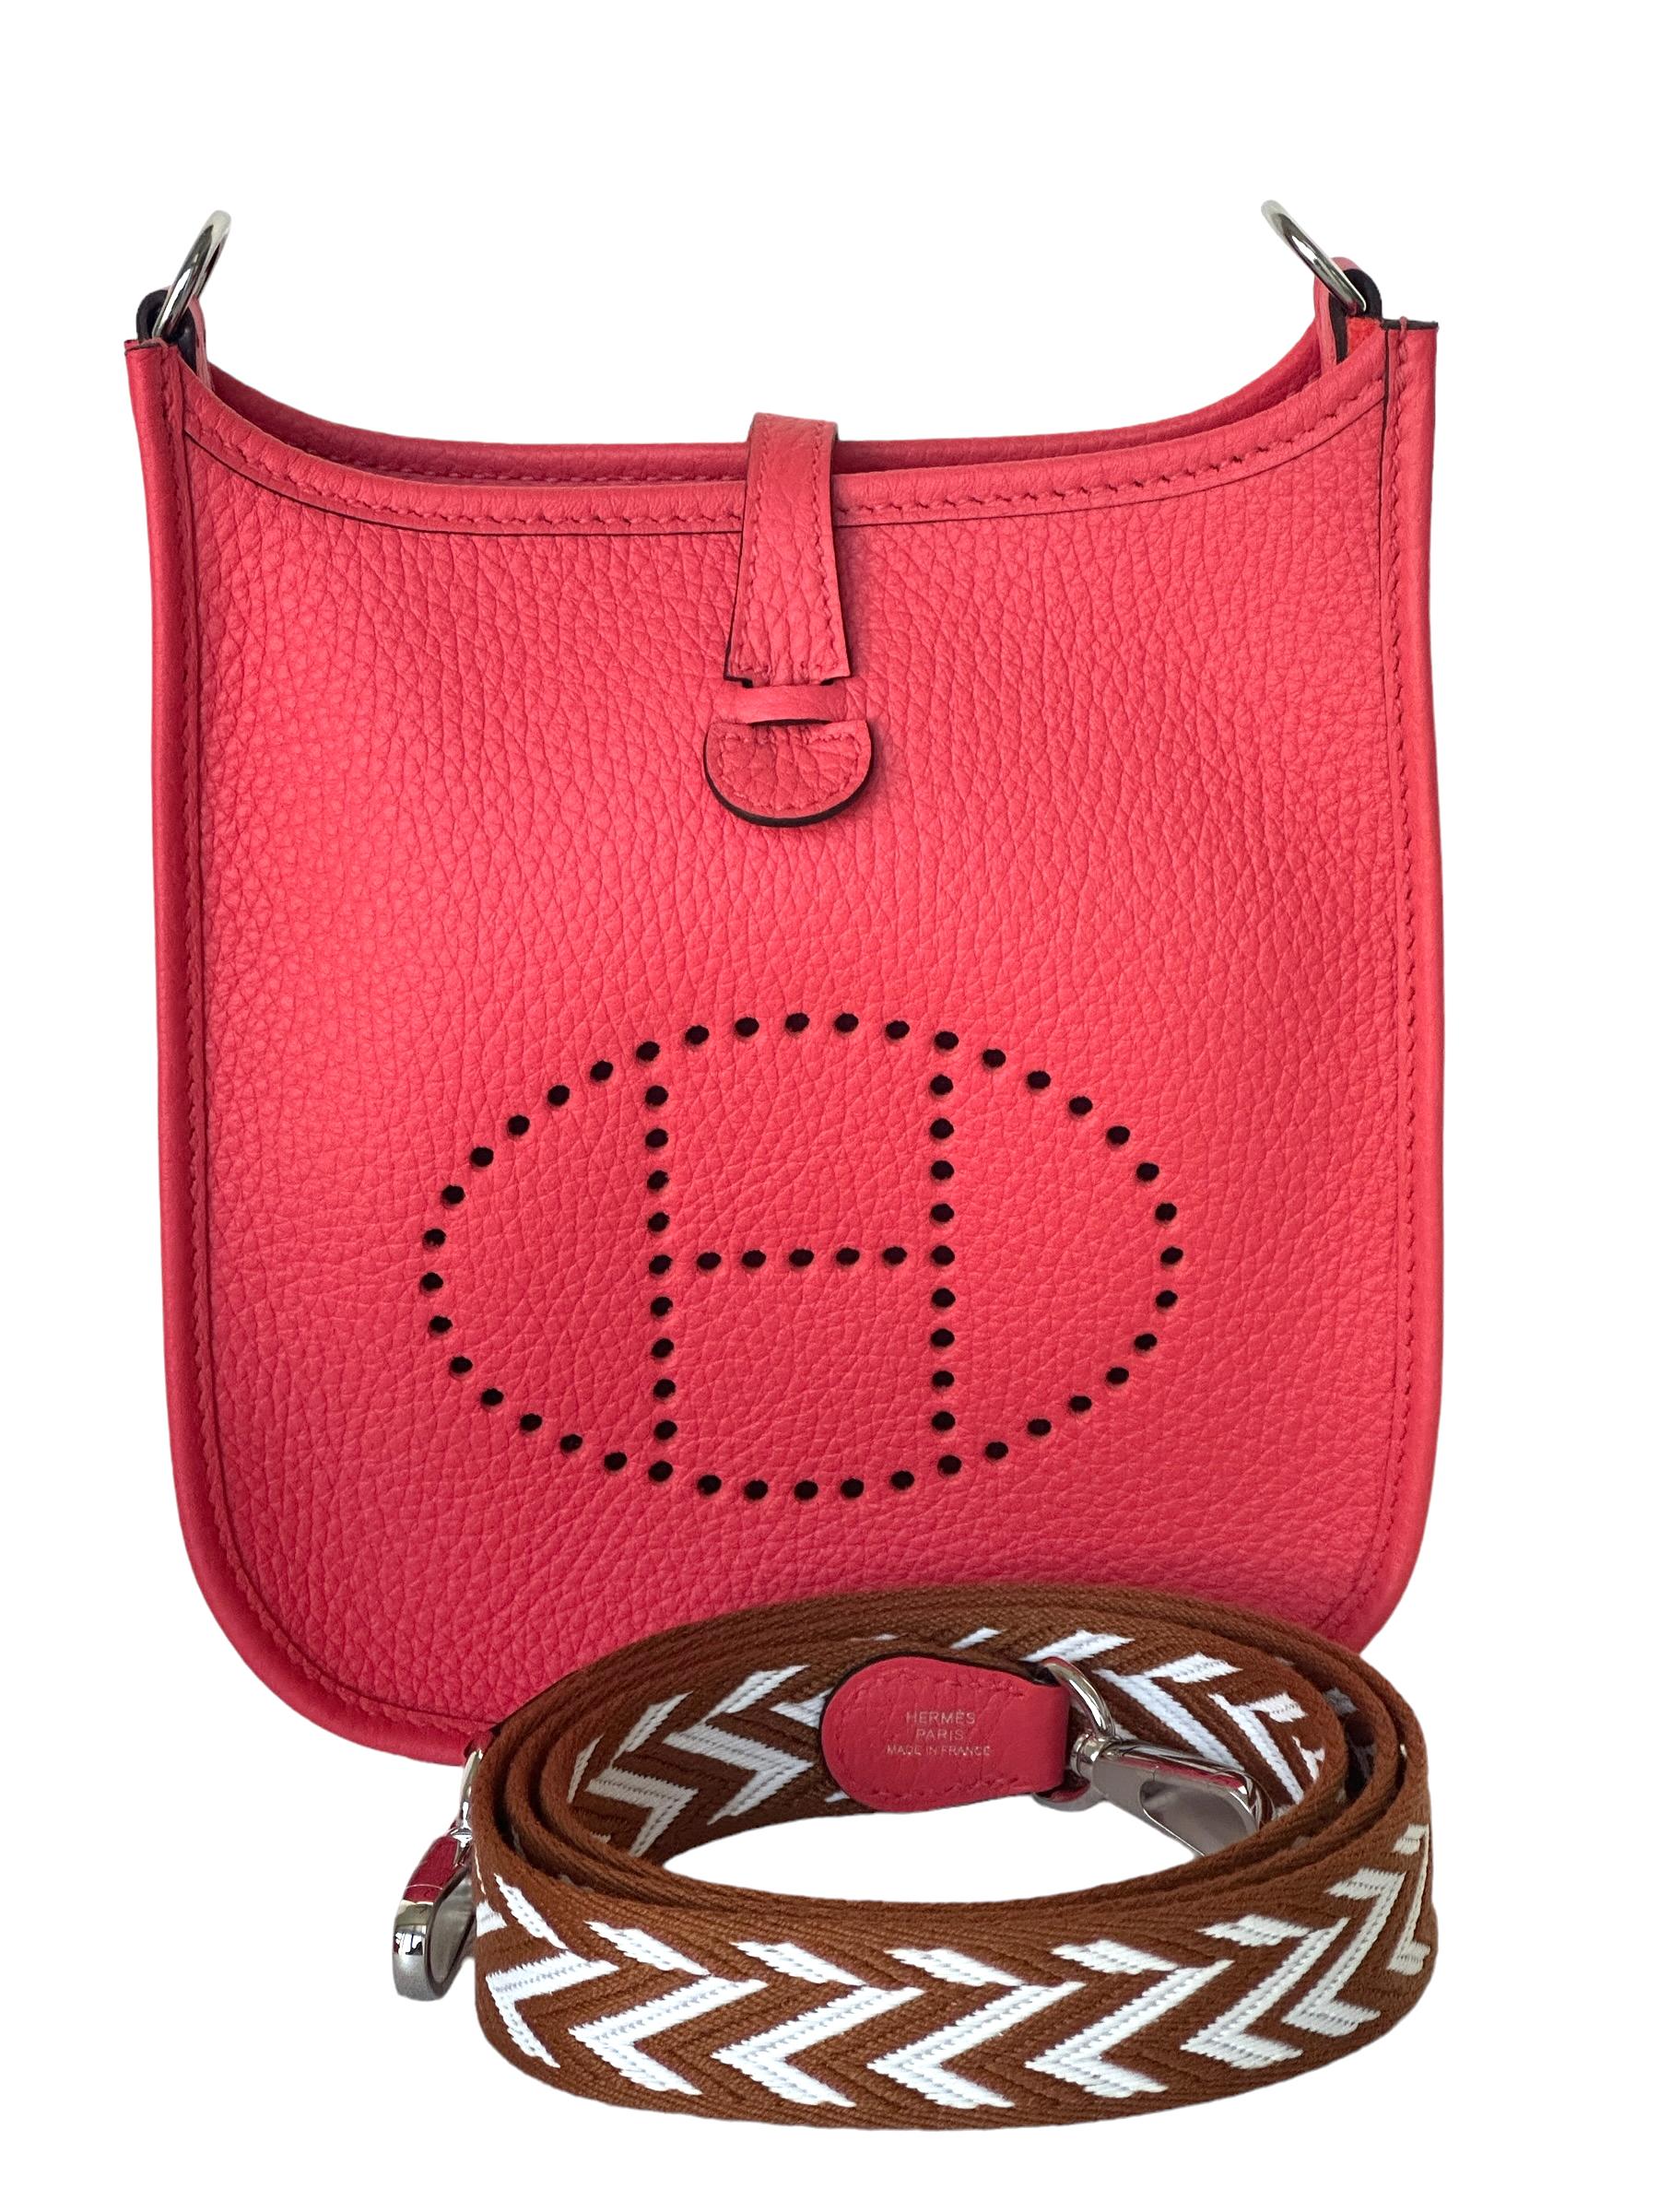 Hermès Evelyne 16 TPM Rose Texas Bag AMAZONE Limited Edition Strap In New Condition For Sale In West Chester, PA